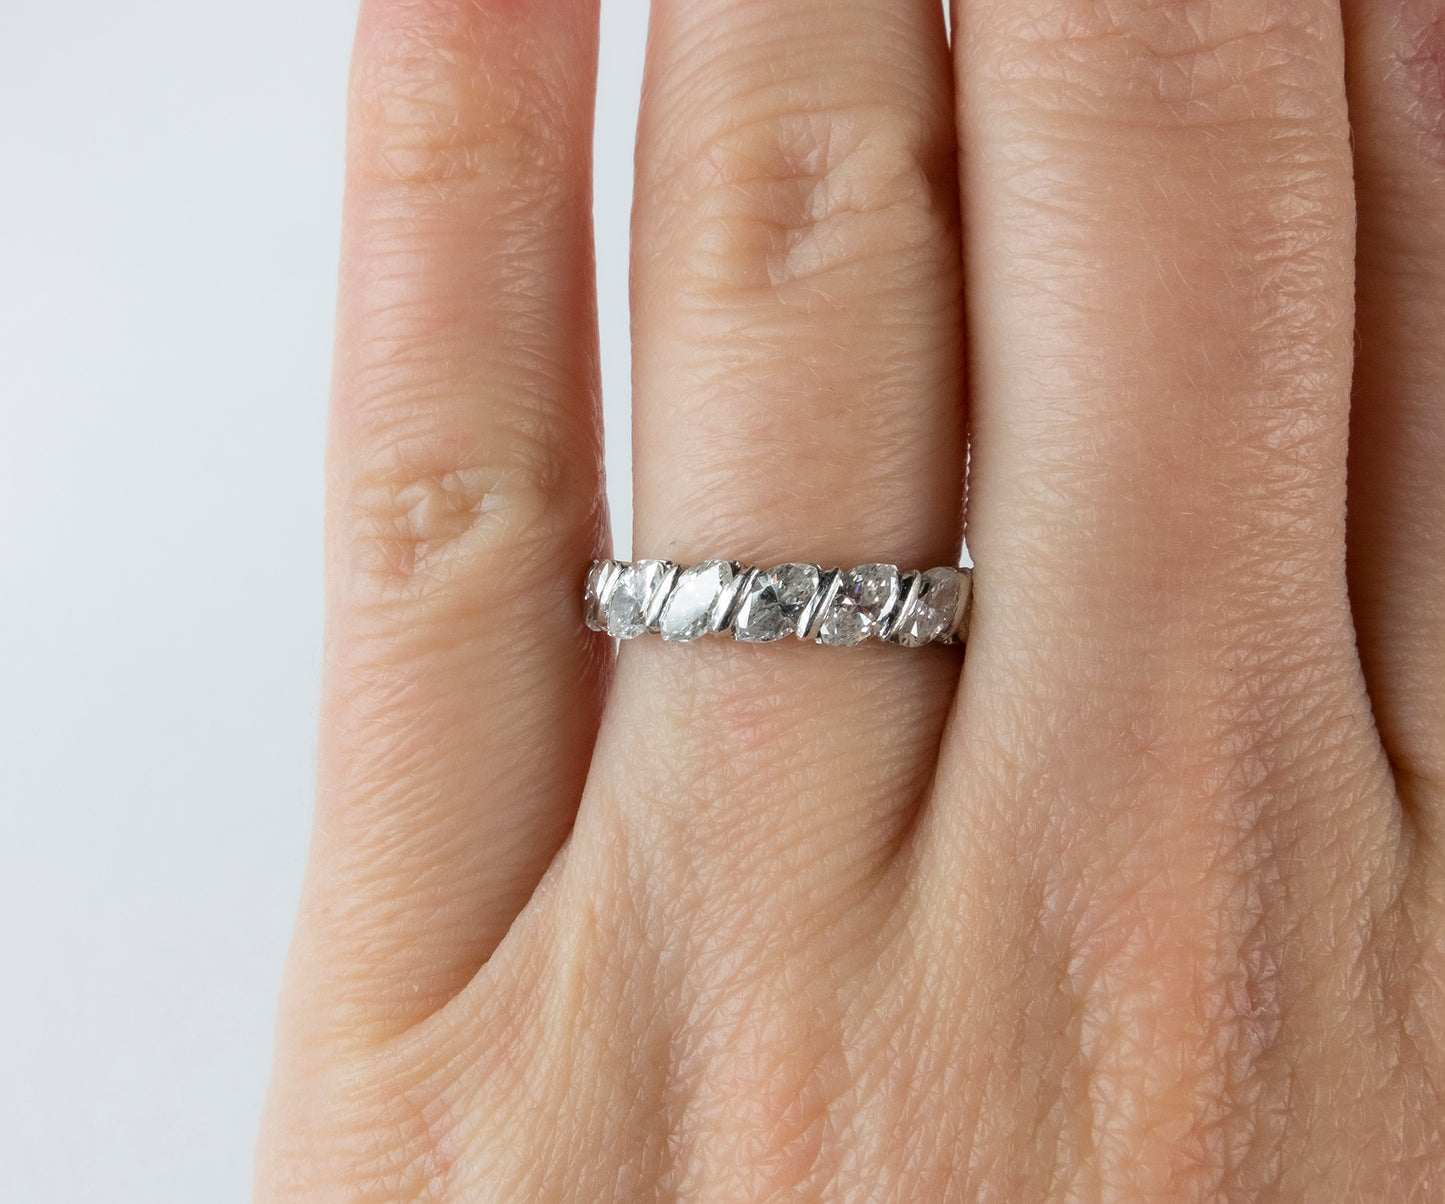 Vintage Marquise Diamond Eternity Ring in White Gold